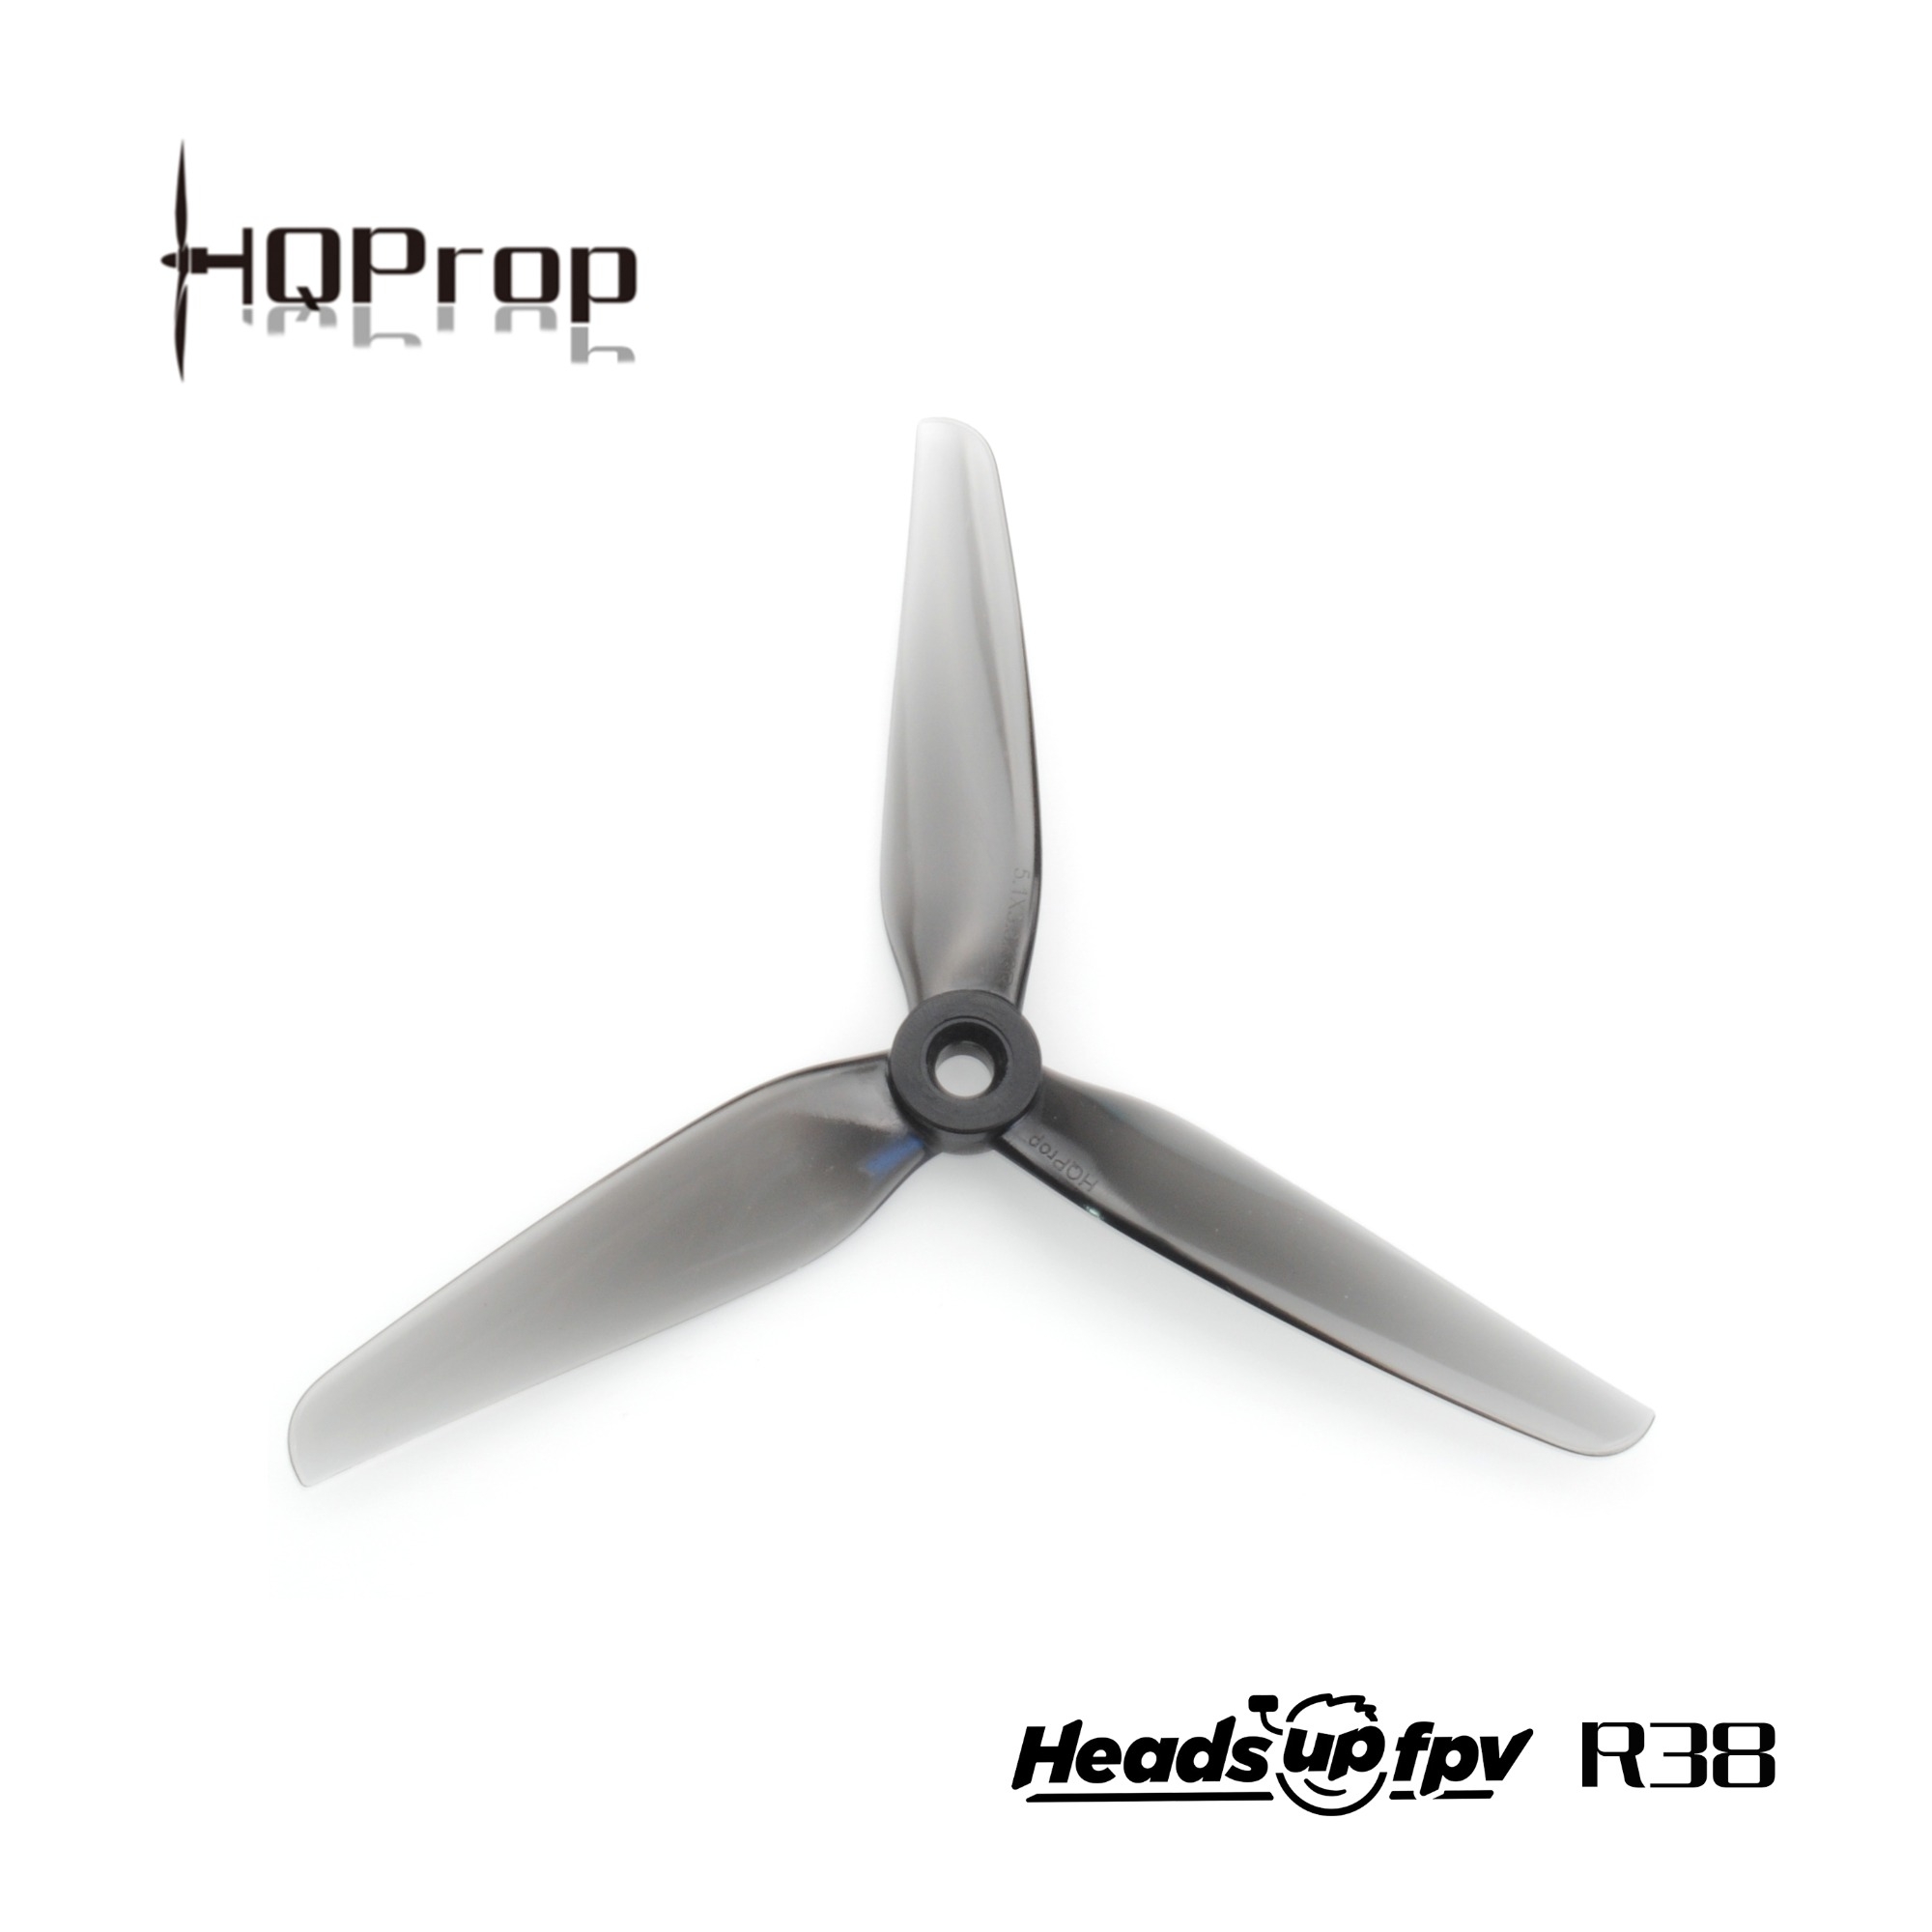 2Pairs HQProp HeadsUp Racing Prop R38 5.1Inch Grey PC 3 Blade Propeller 2CW+2CCW for FPV Racing RC Drone